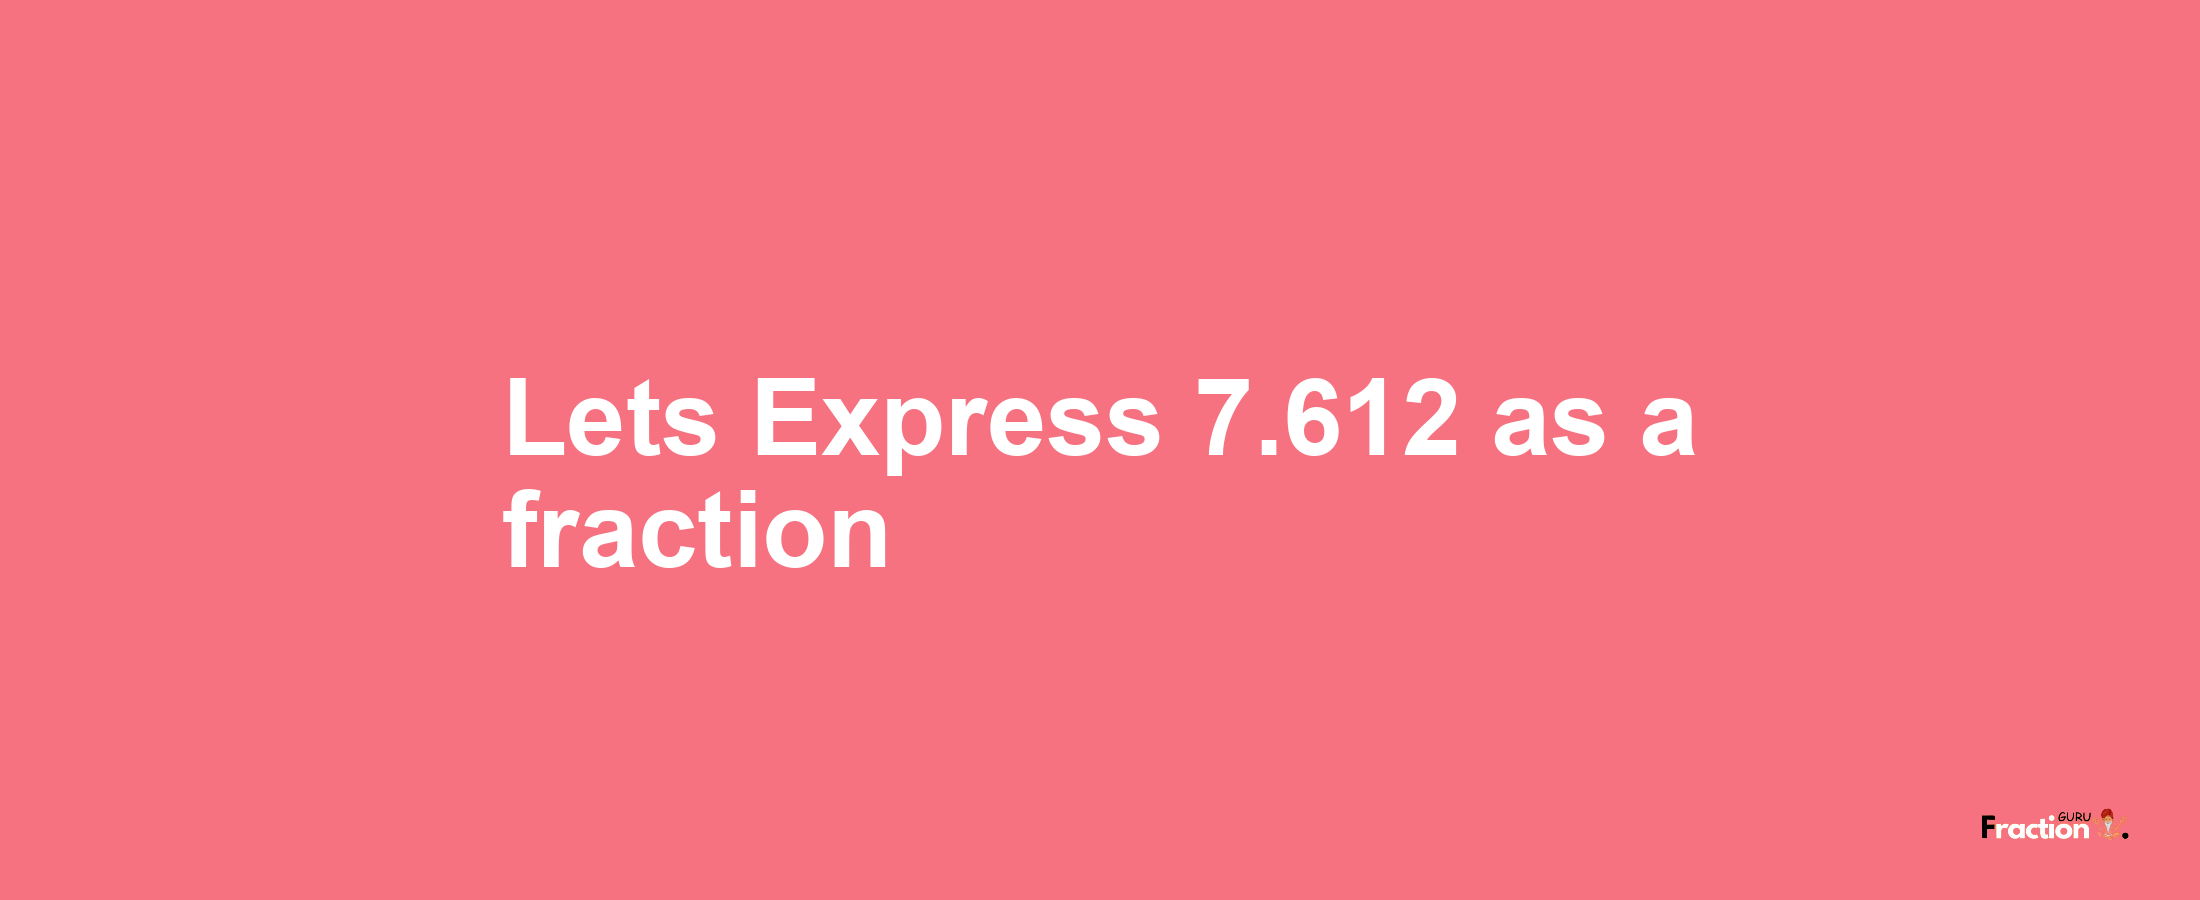 Lets Express 7.612 as afraction